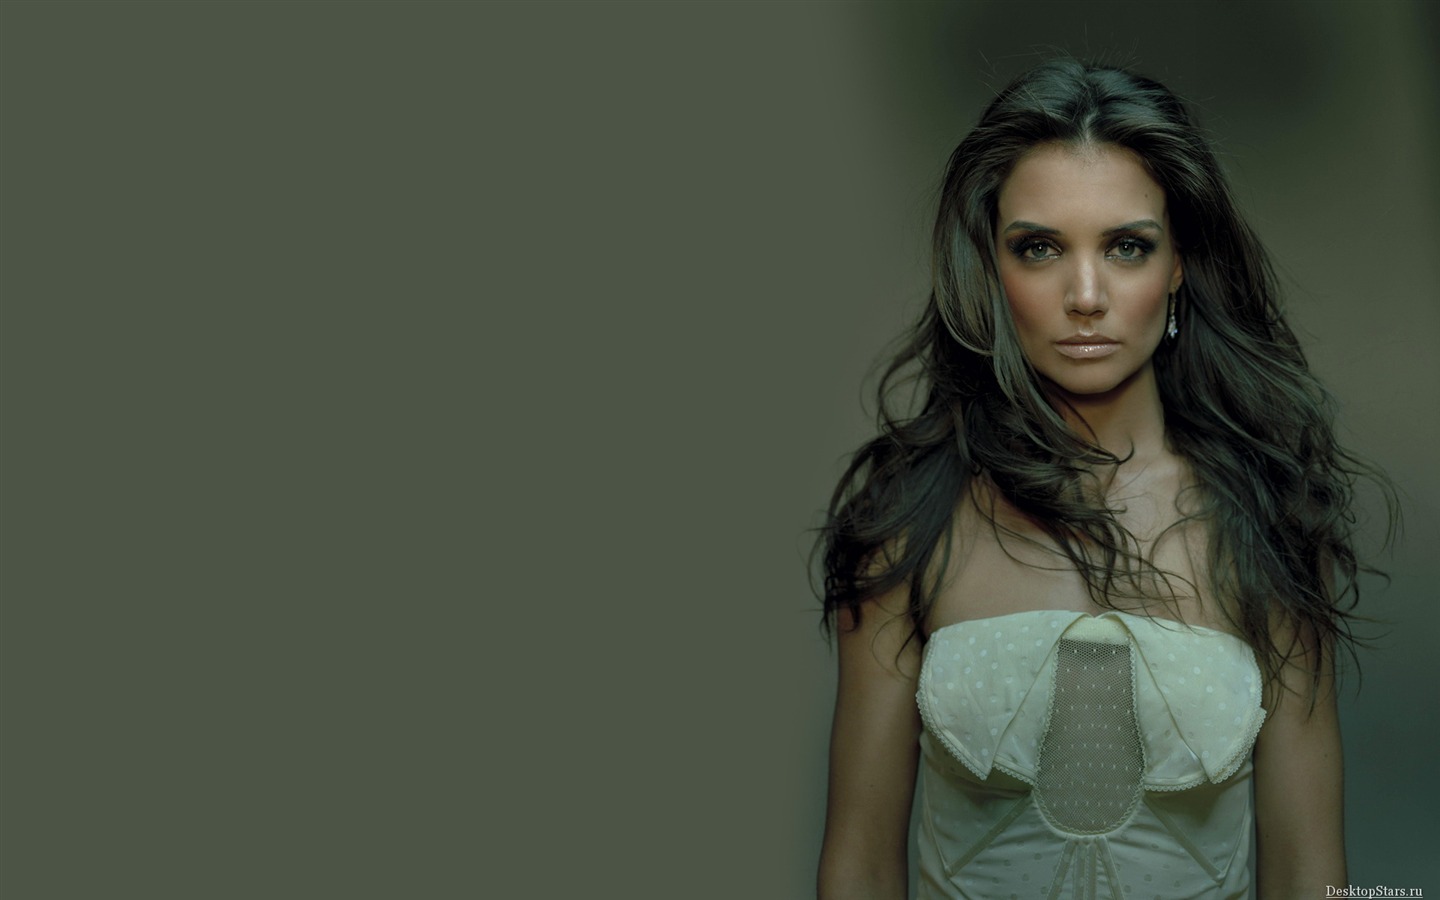 Katie Holmes #023 - 1440x900 Wallpapers Pictures Photos Images